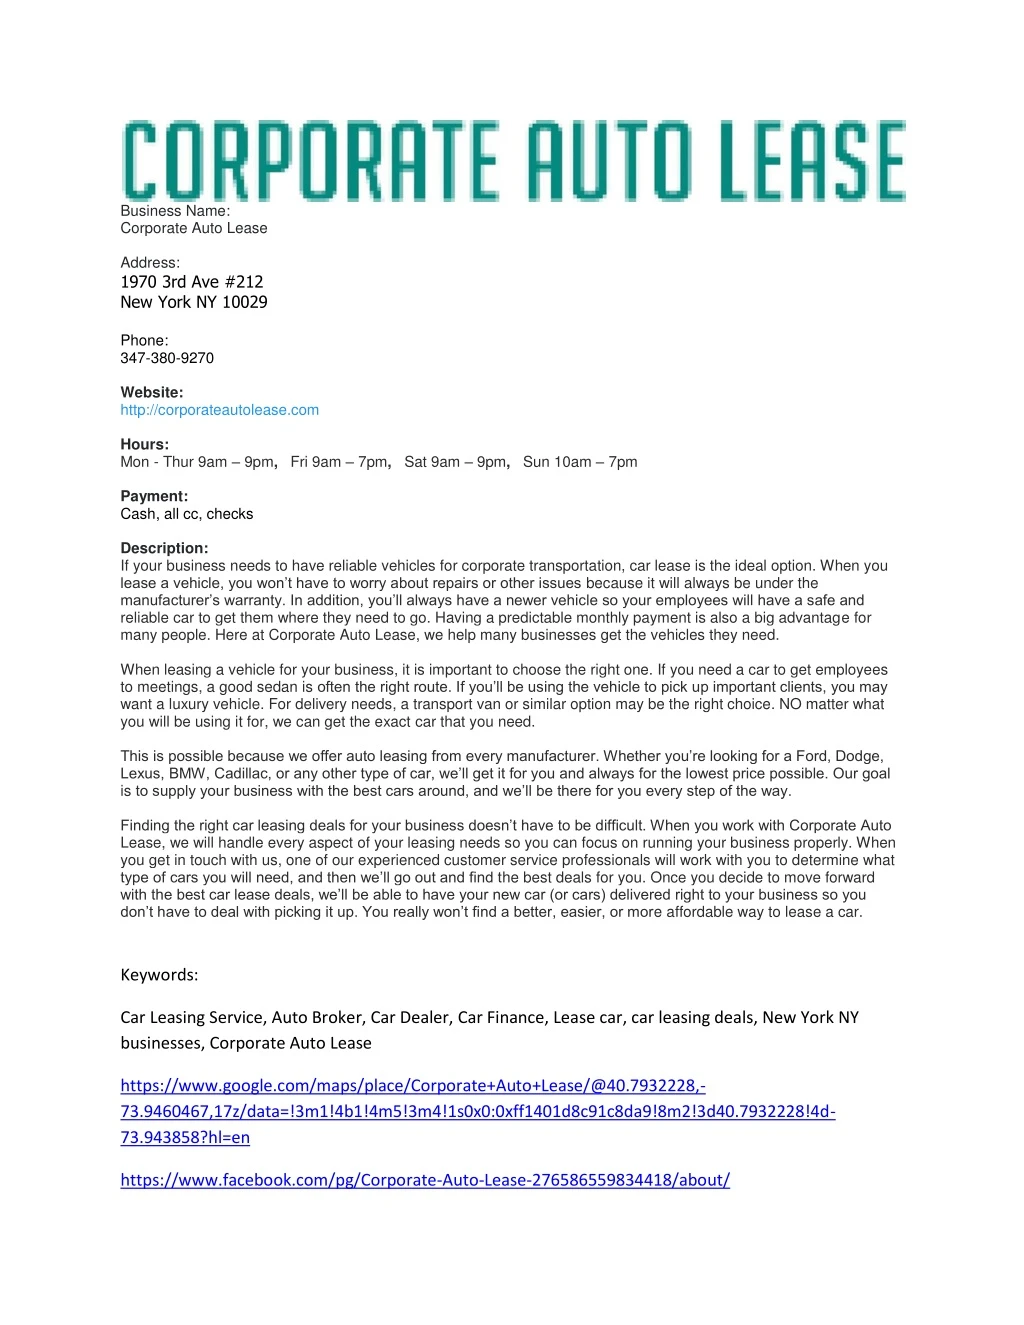 business name corporate auto lease address 1970